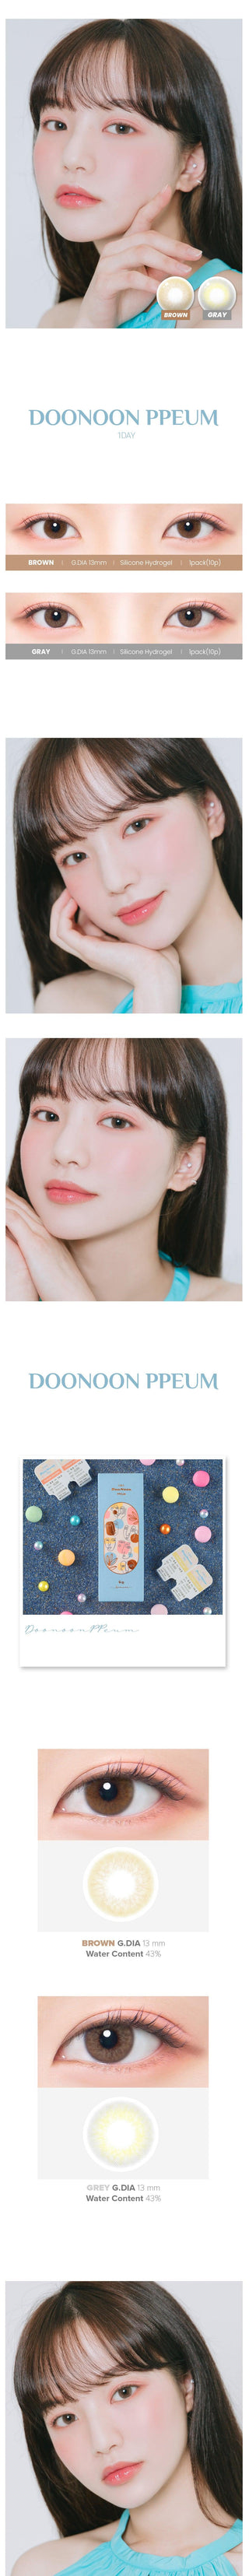 Variety of DooNoon Ppeum 1-Day Grey (10pk) contact lens colors displayed, with closeups of an eye wearing the contact lens colors, and with a model wearing the contact lens colors showing realistic eye-enlarging effect from various angles.